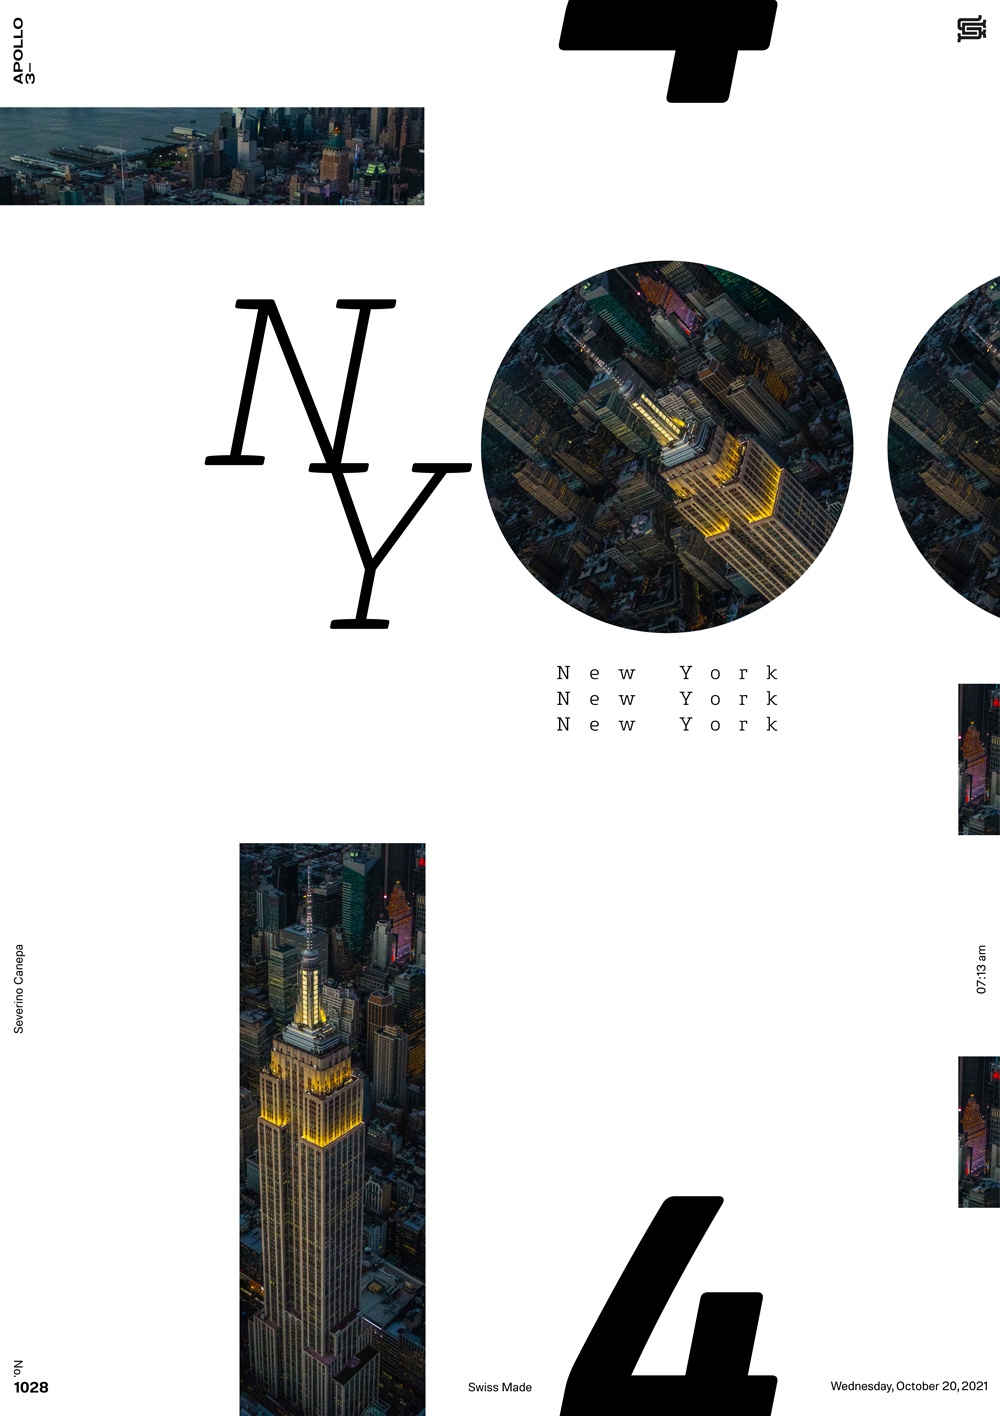 Digital creation made with a picture of New York Buildings and typography